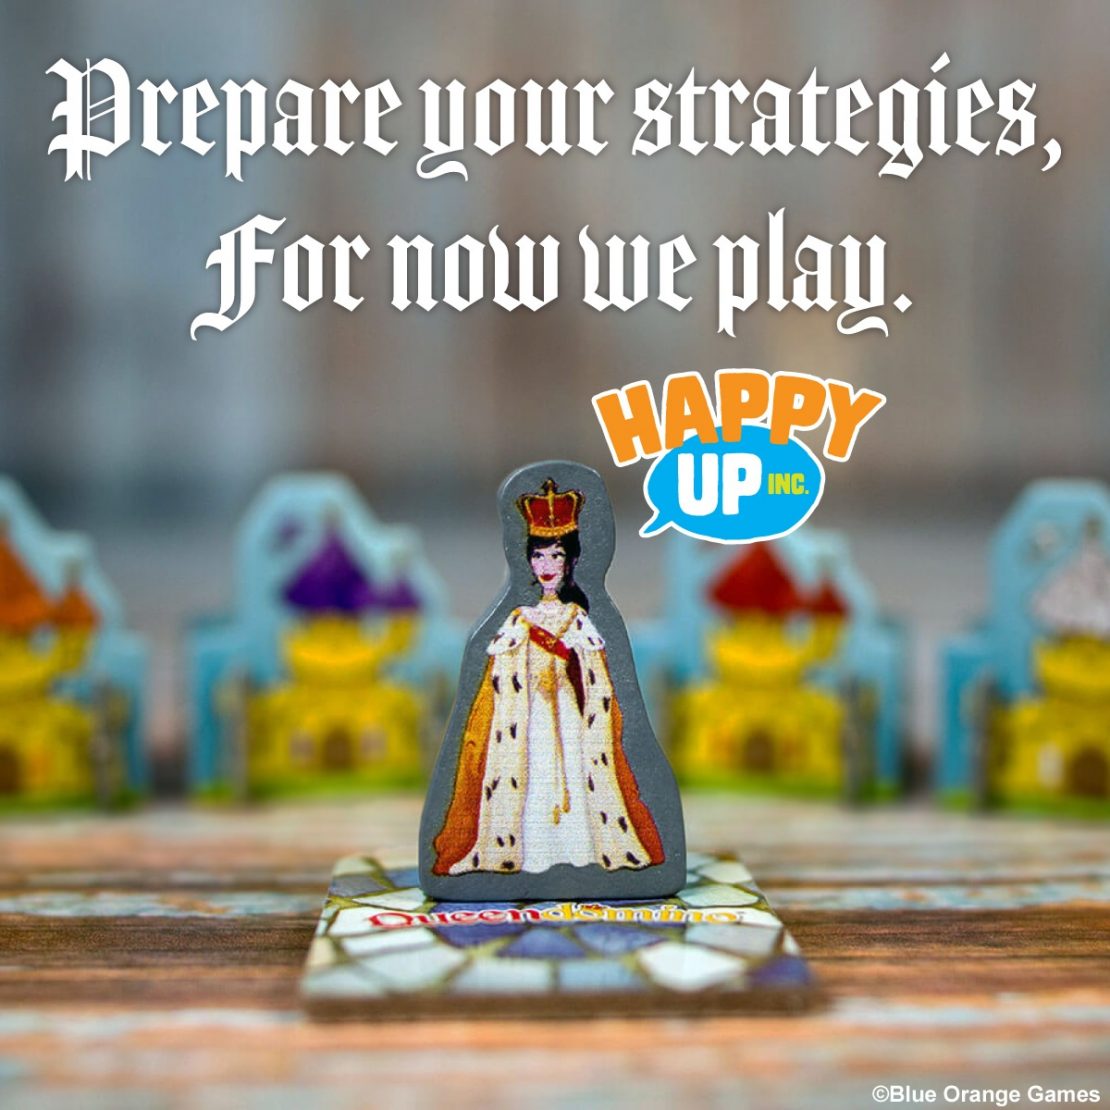 "Prepare your strategies, for now we play."